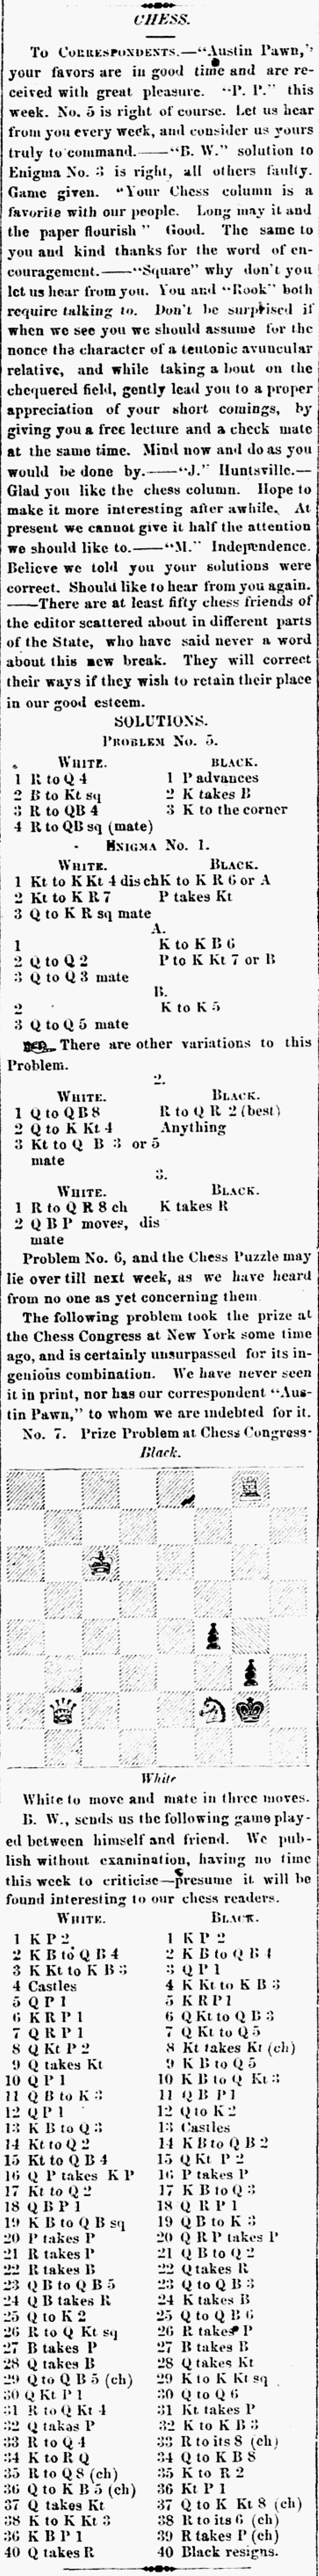 1859.02.09-01 Houston Weekly Telegraph.png